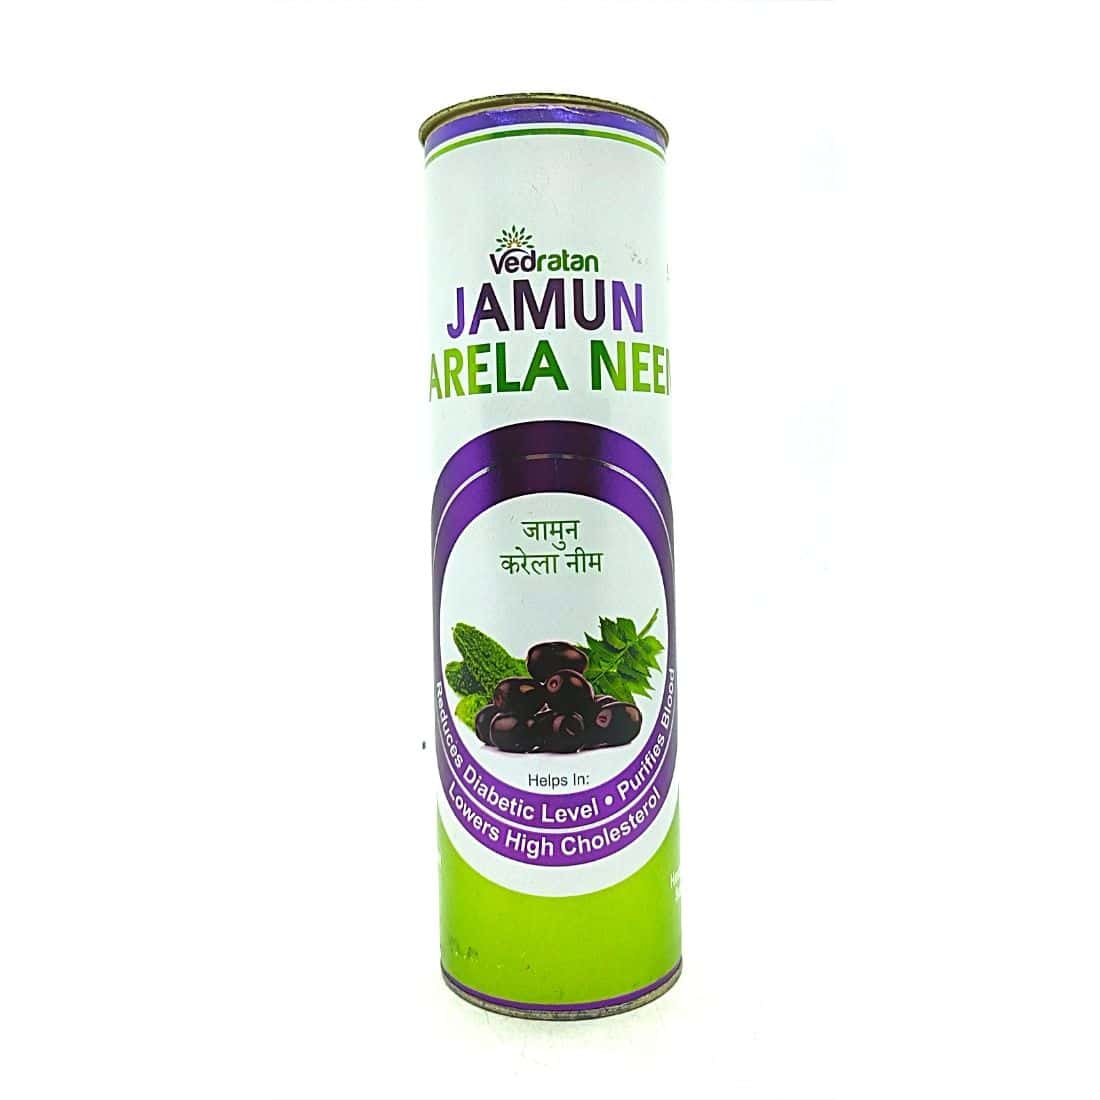 Vedratan Jamun Karela Neem Juice Helps in purifying blood due to its antioxidant properties and also enhances digestion,